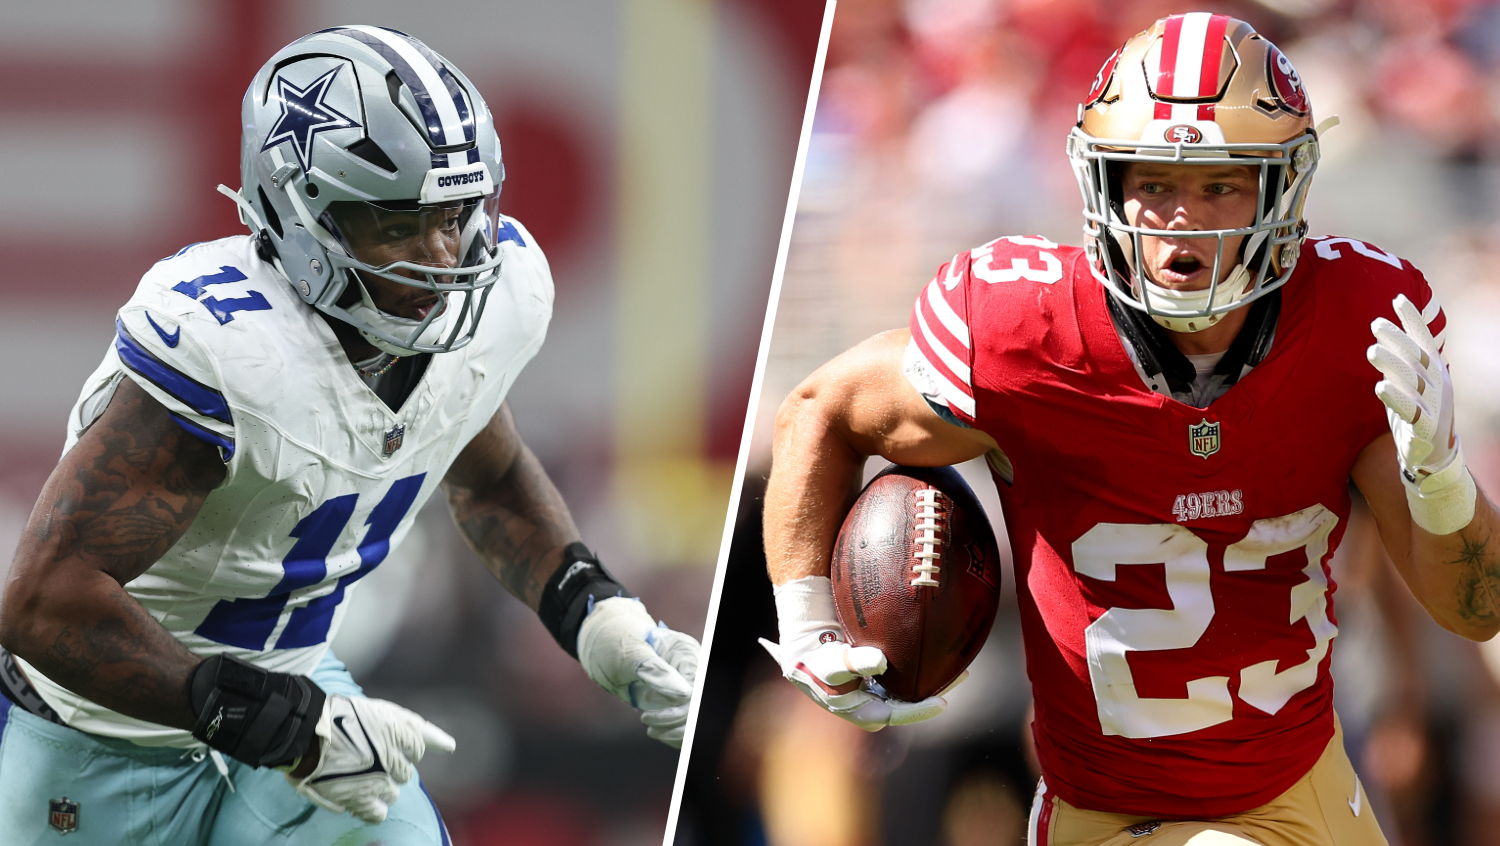 49ers vs. Cowboys live stream: How to watch NFL Week 5 game on TV